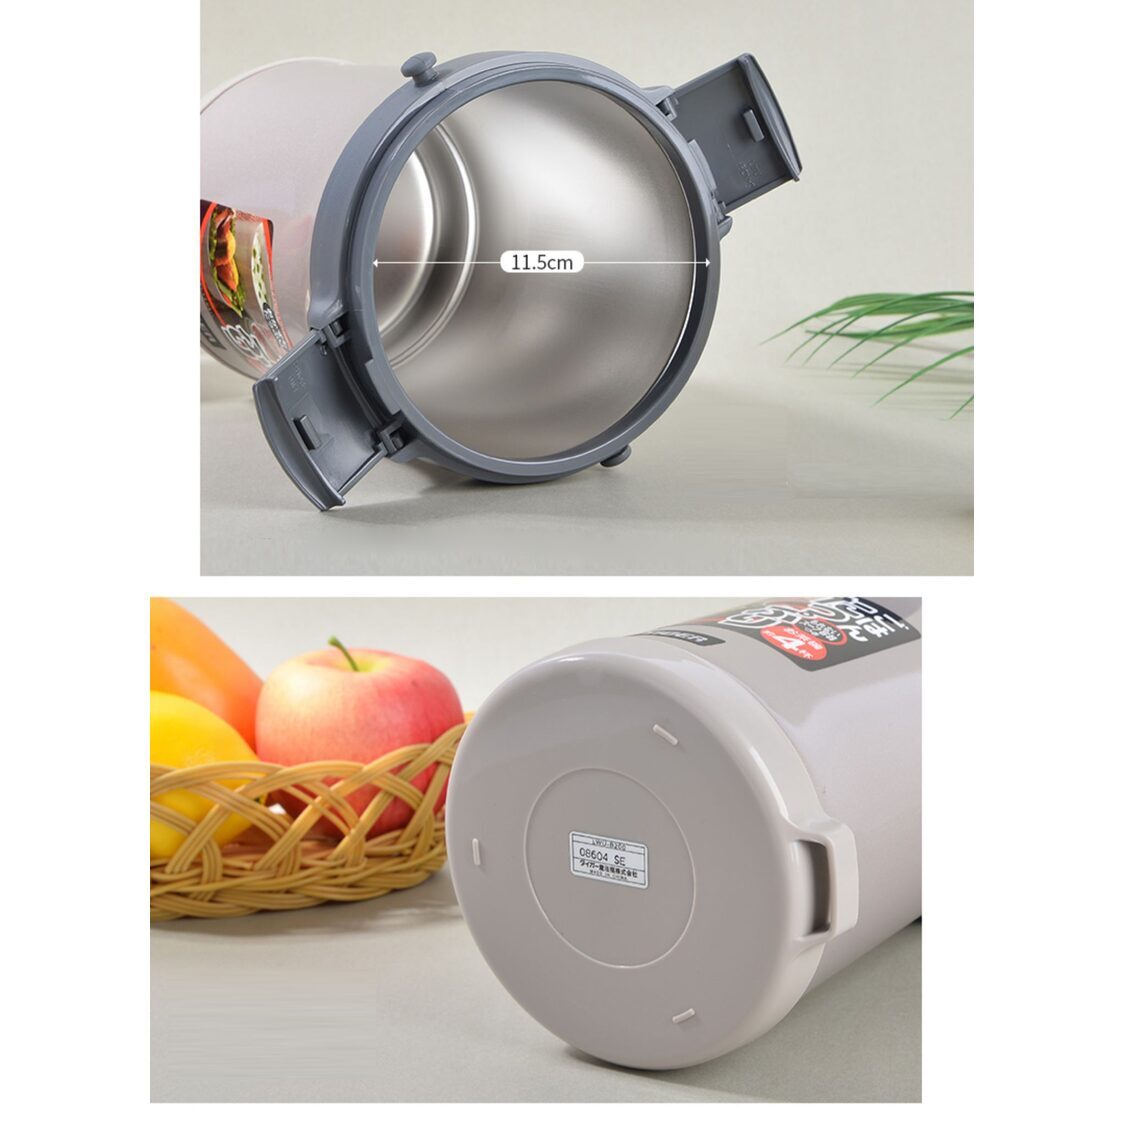 https://media.metro.sg/ProductImages/6df9c953-2ce3-4c87-b3c7-6f810f33122f/5/std/tiger-vacuum-insulated-double-stainless-steel-lunch-box-with-bag-4-cups-lwu-b200-231005101634.jpg